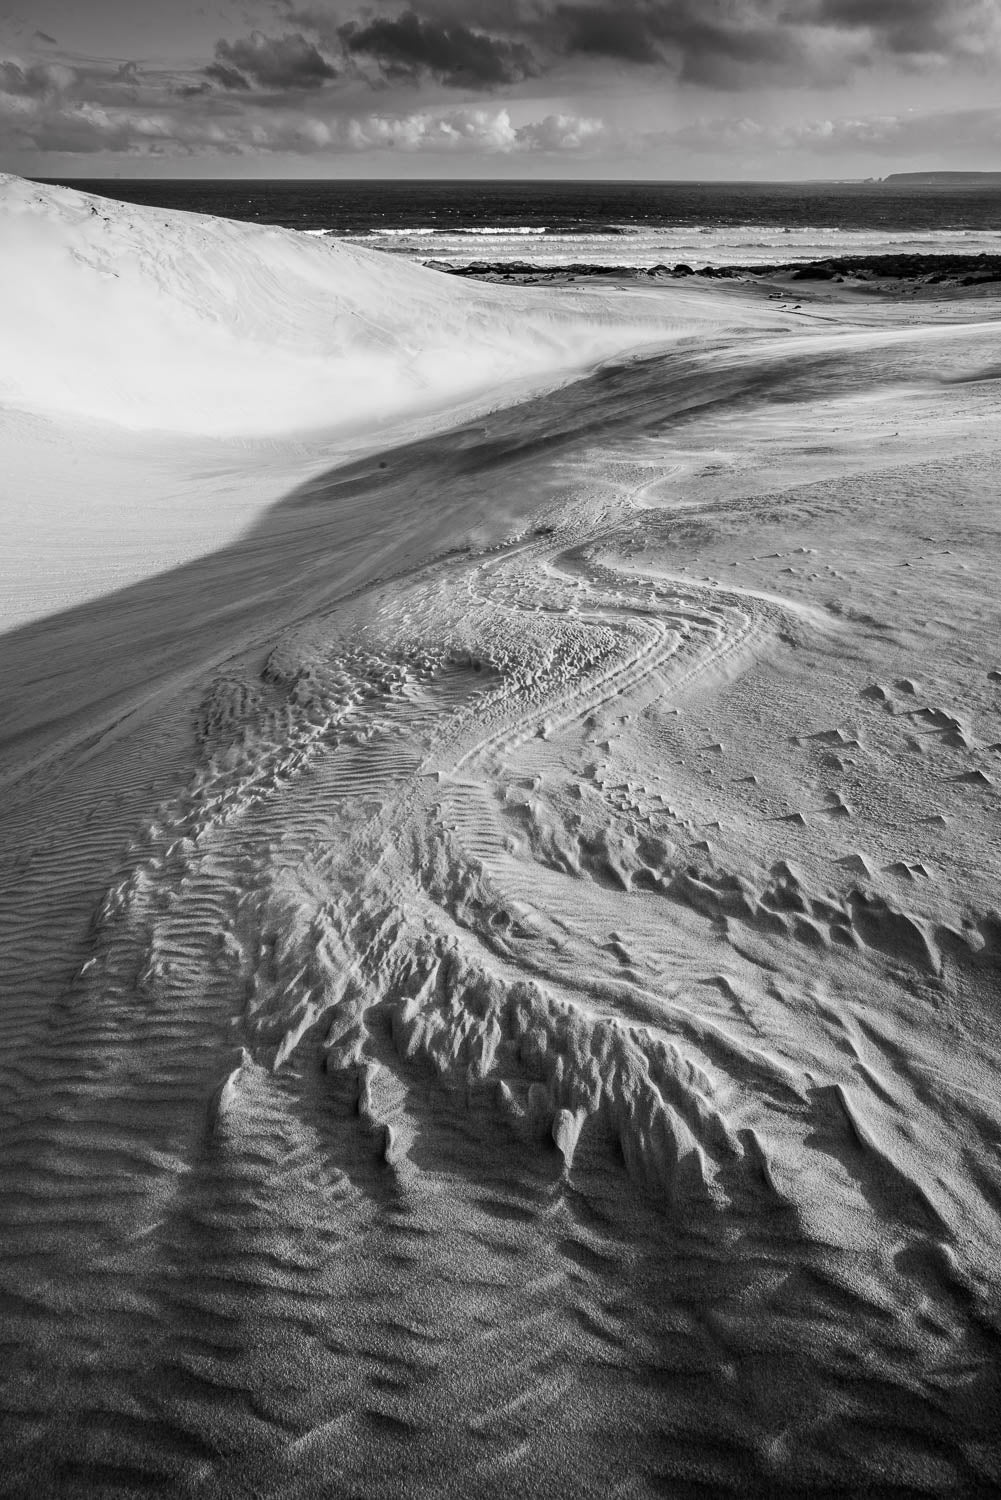 Giant wet and wavy sand in a desert, Sand Dunes, Eyre Peninsula